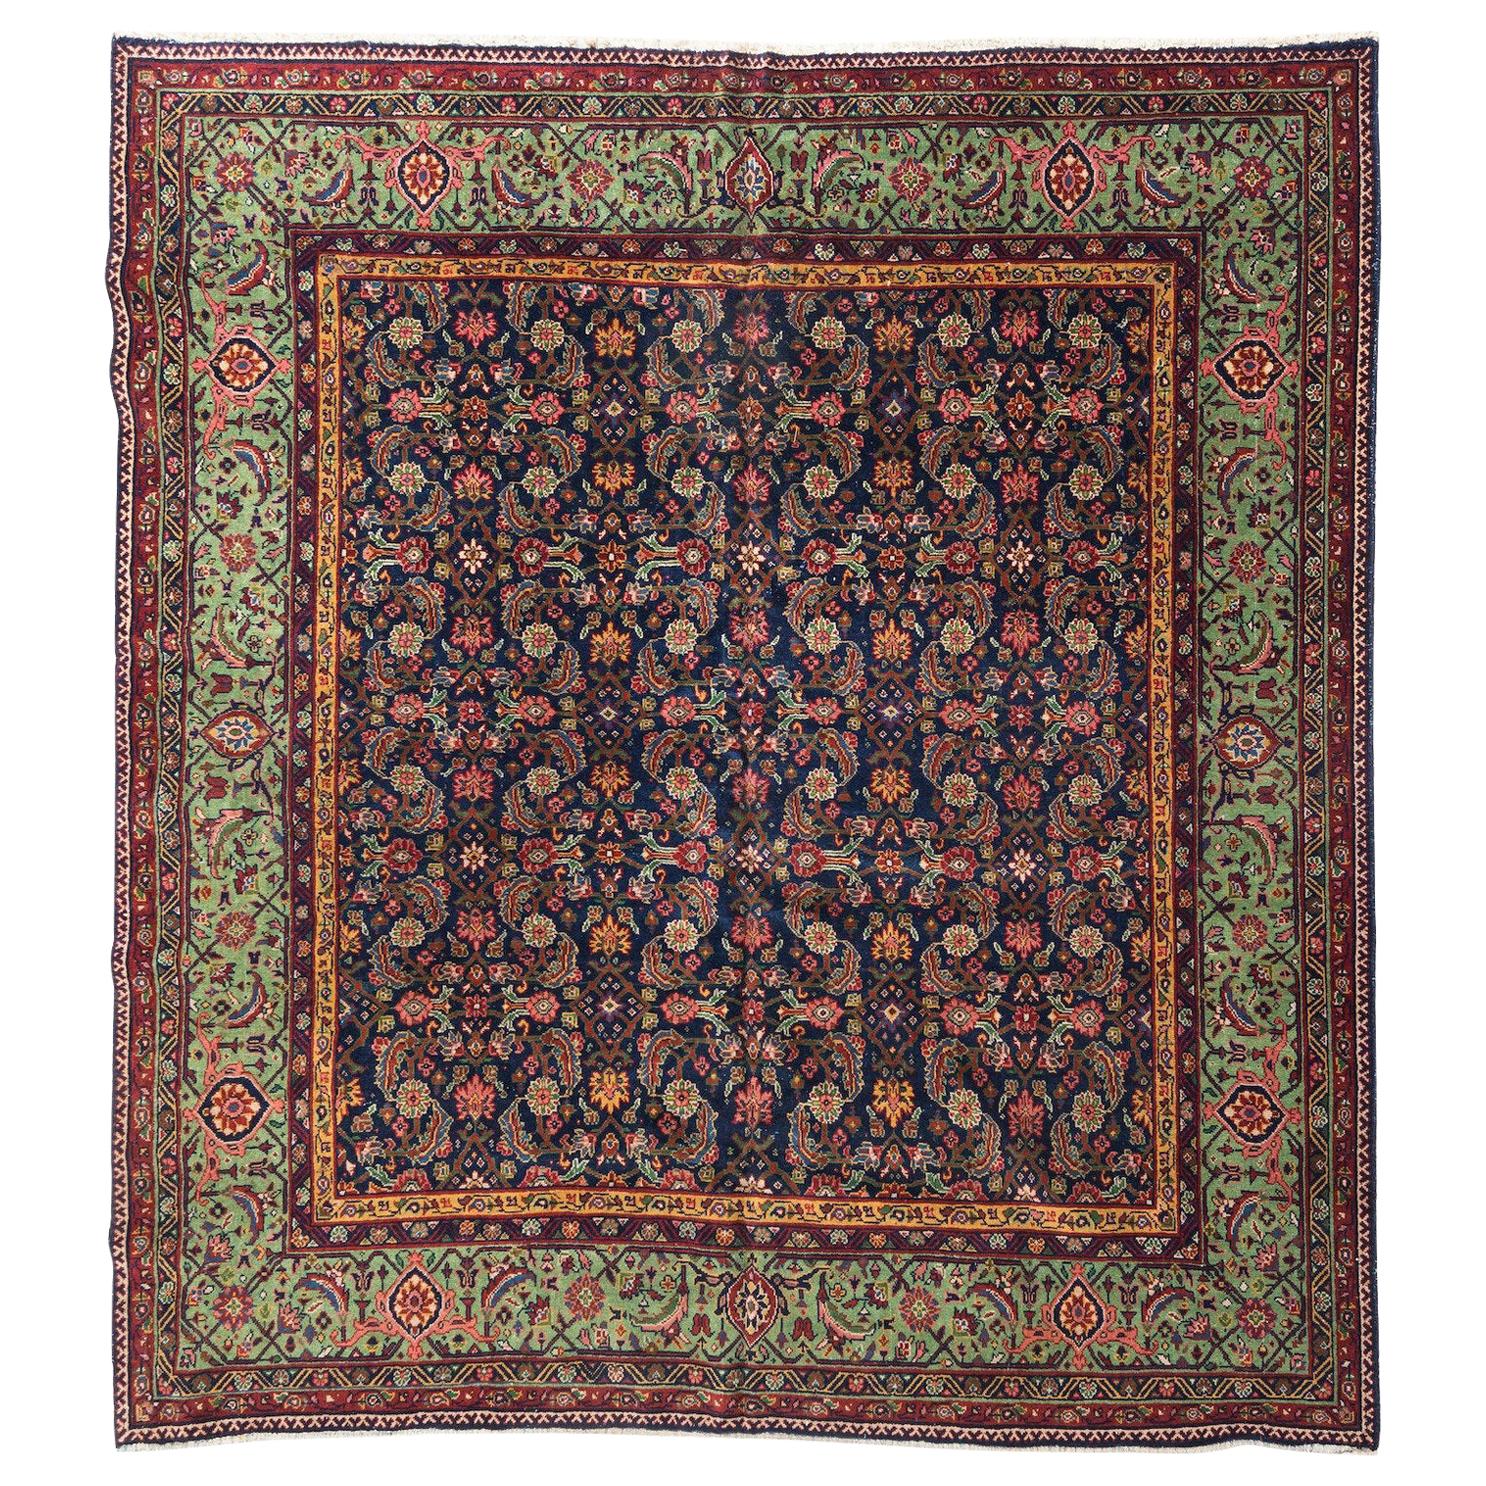 Antique Blue and Green Square Floral Persian Farrahan Rug circa 1930s-1940s